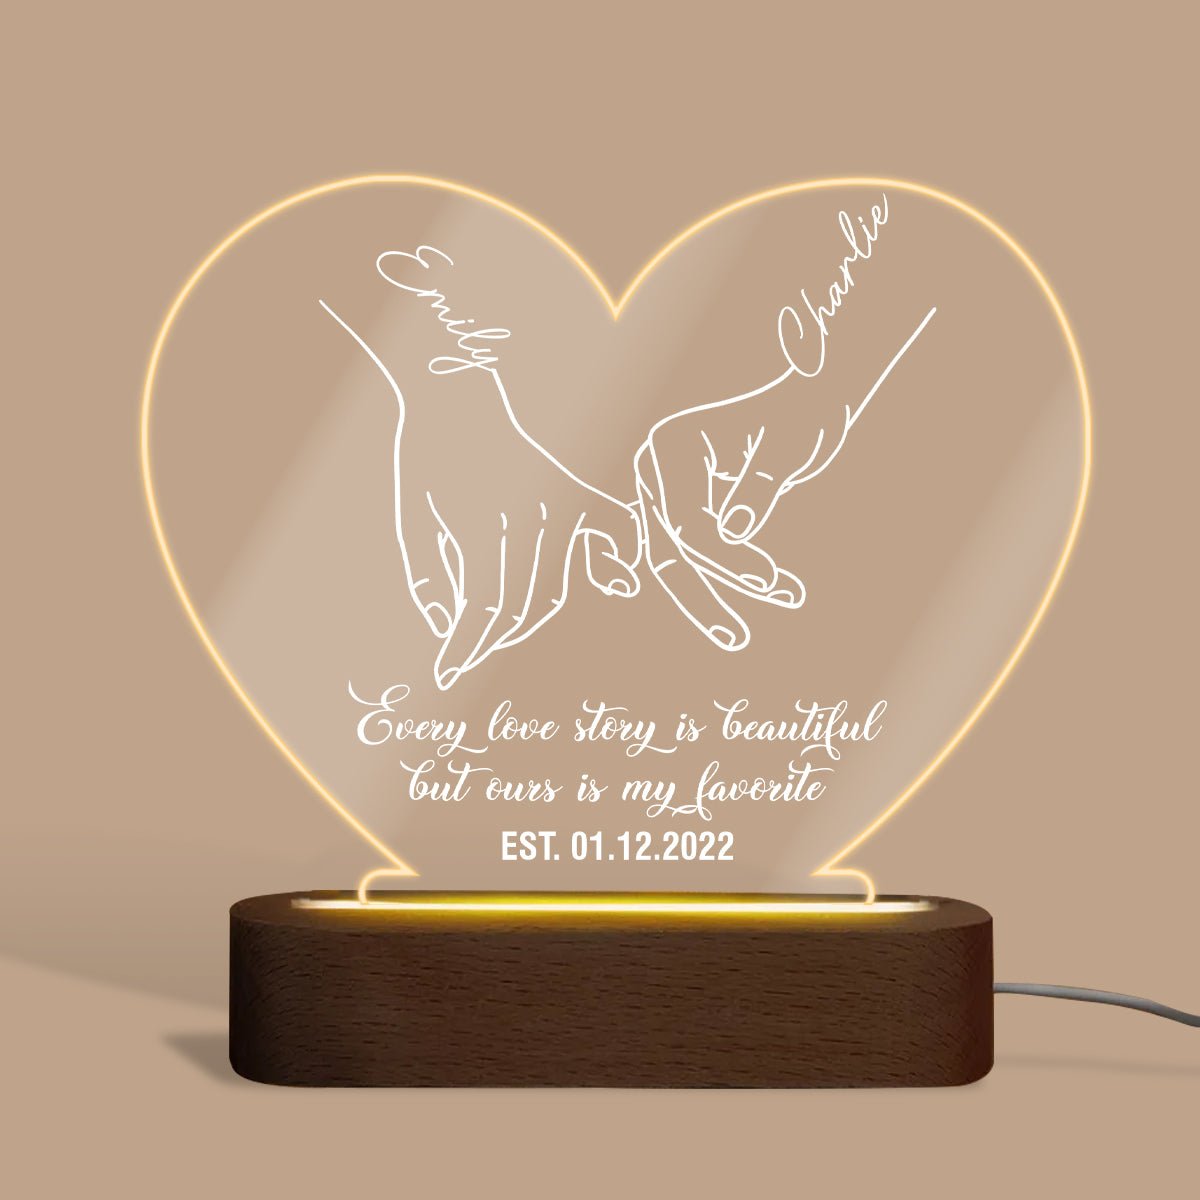 Holding Hands Our Story Is My Favorite - Personalized Heart Acrylic LED Lamp - Best Gift for Couple - Giftago